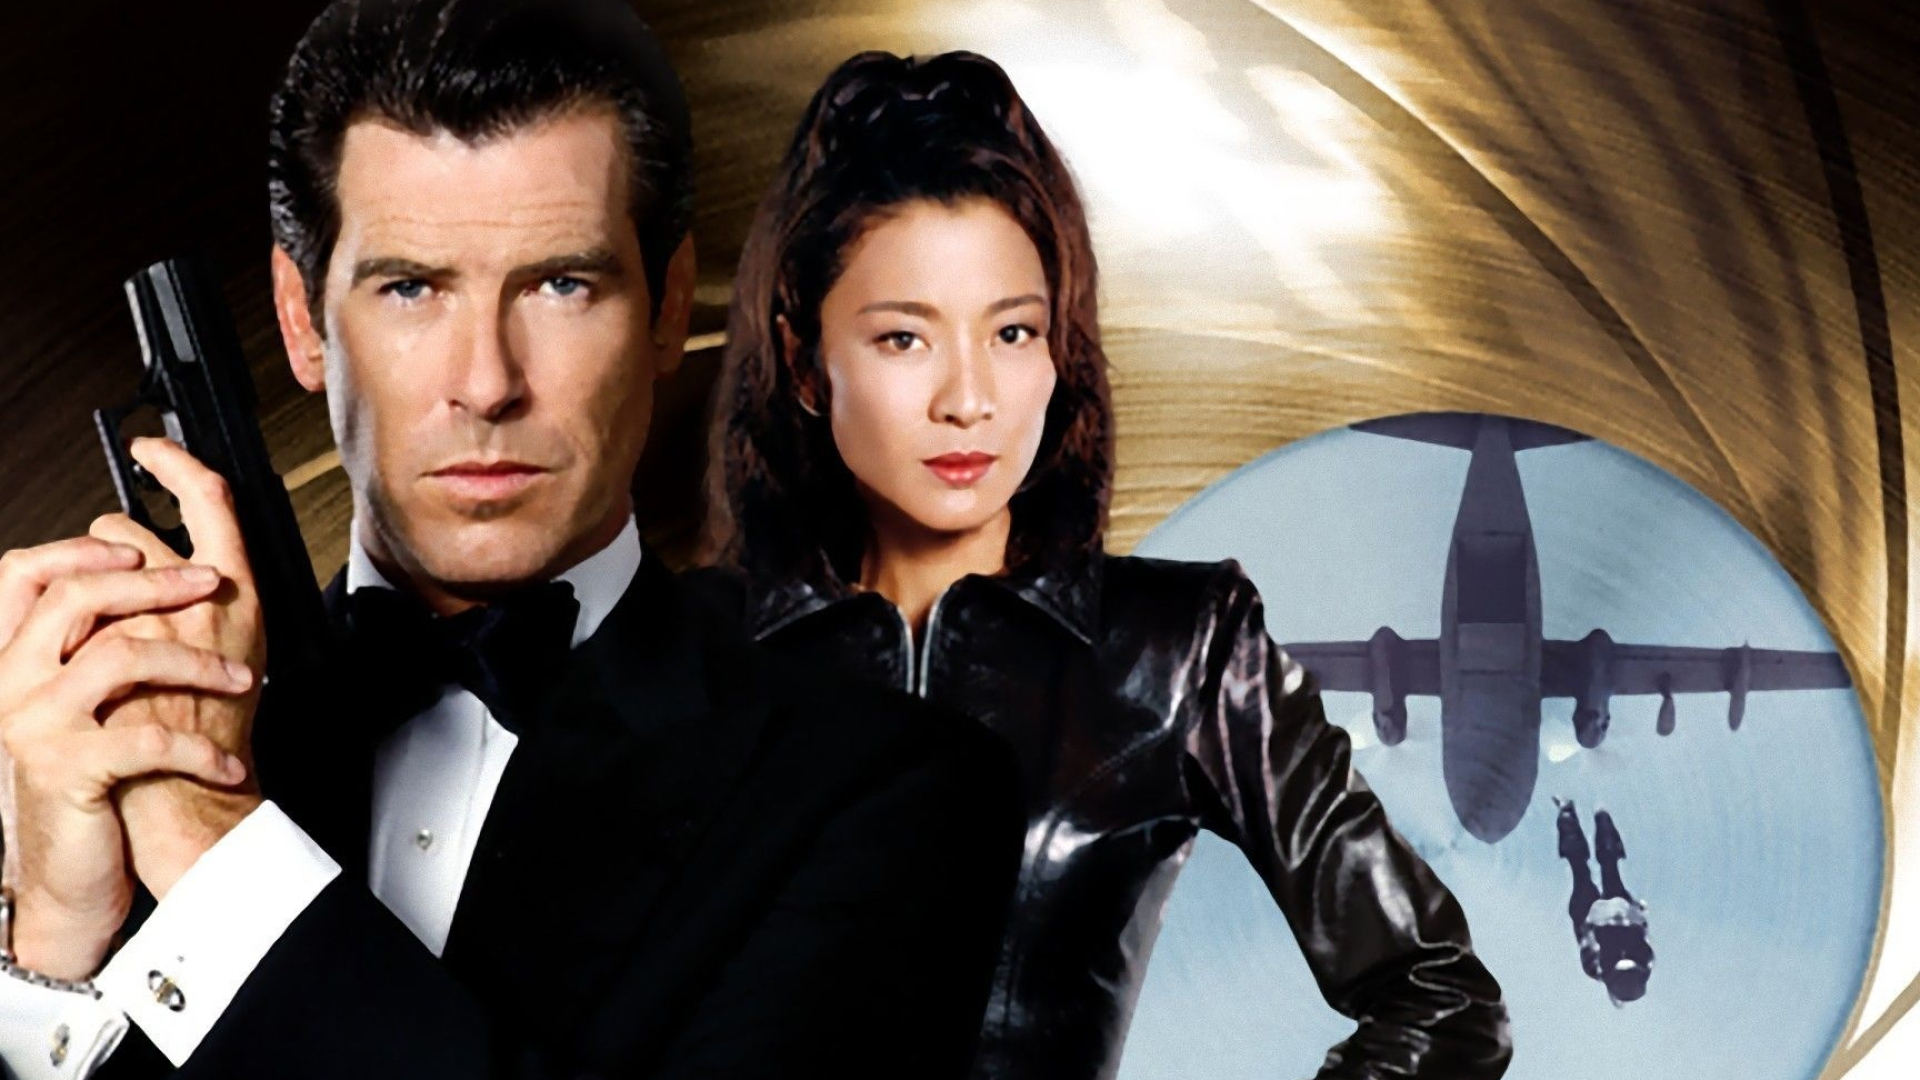 Tomorrow Never Dies, Top free wallpapers, Backgrounds, Movie theme, 1920x1080 Full HD Desktop